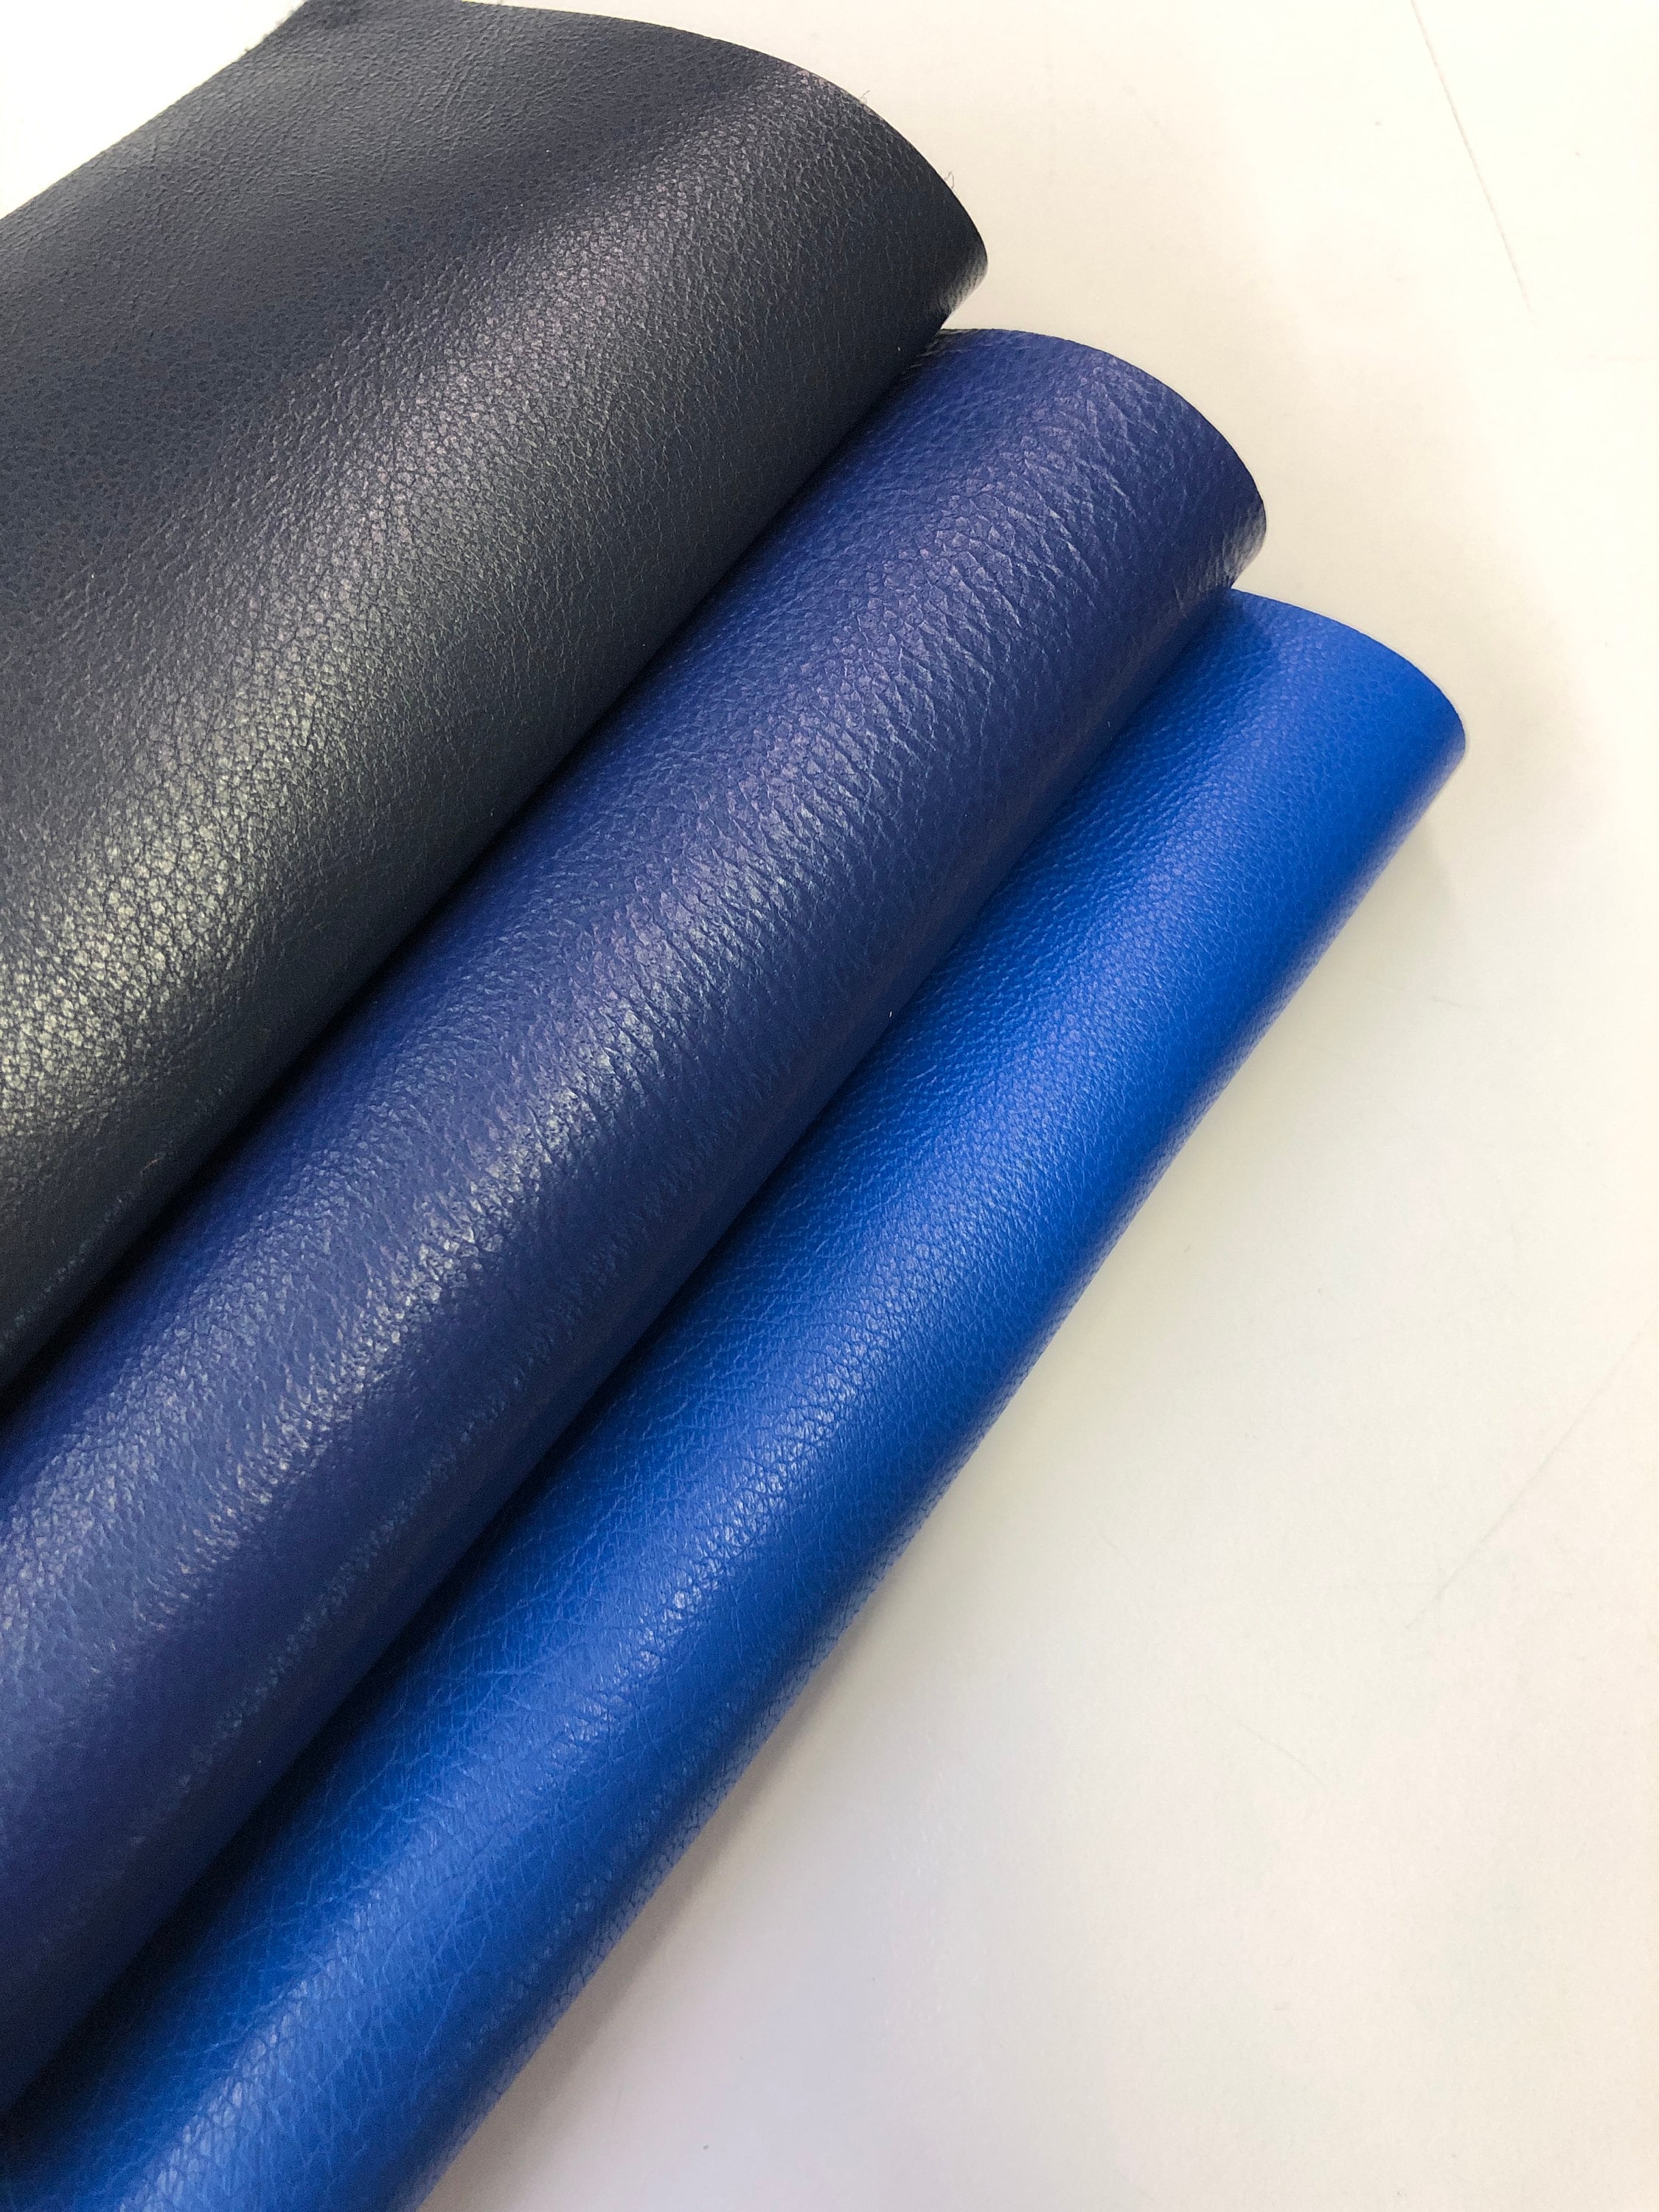 BLUE Metallic Leather Hide // Choose Your Size//genuine Metal Blue Leather  Skin //shiny Pieces for Crafting //ROYAL BLUE, 352, 0.9mm/2.25oz 